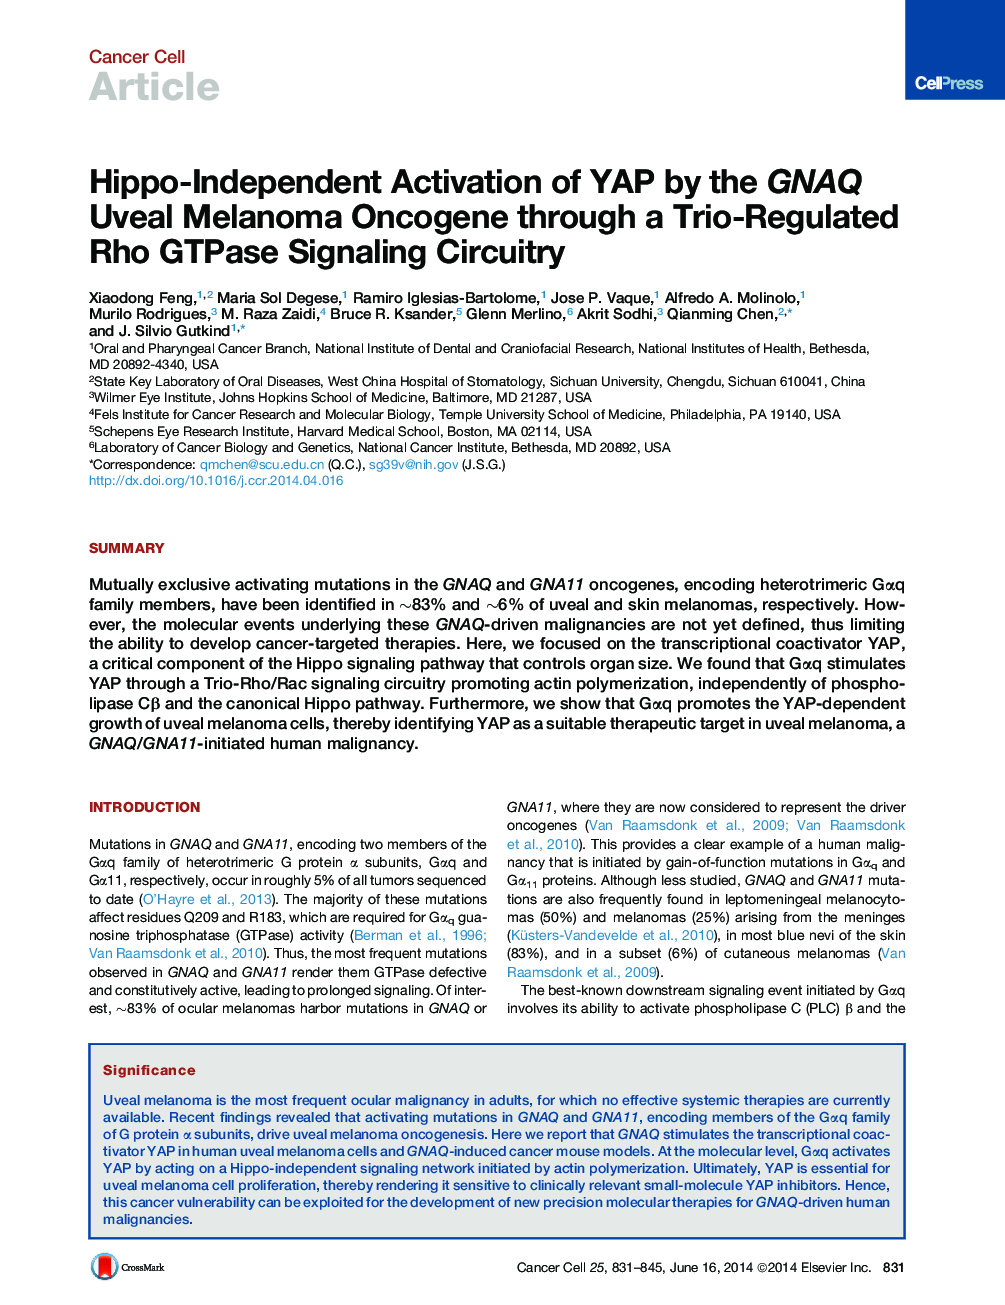 Hippo-Independent Activation of YAP by the GNAQ Uveal Melanoma Oncogene through a Trio-Regulated Rho GTPase Signaling Circuitry